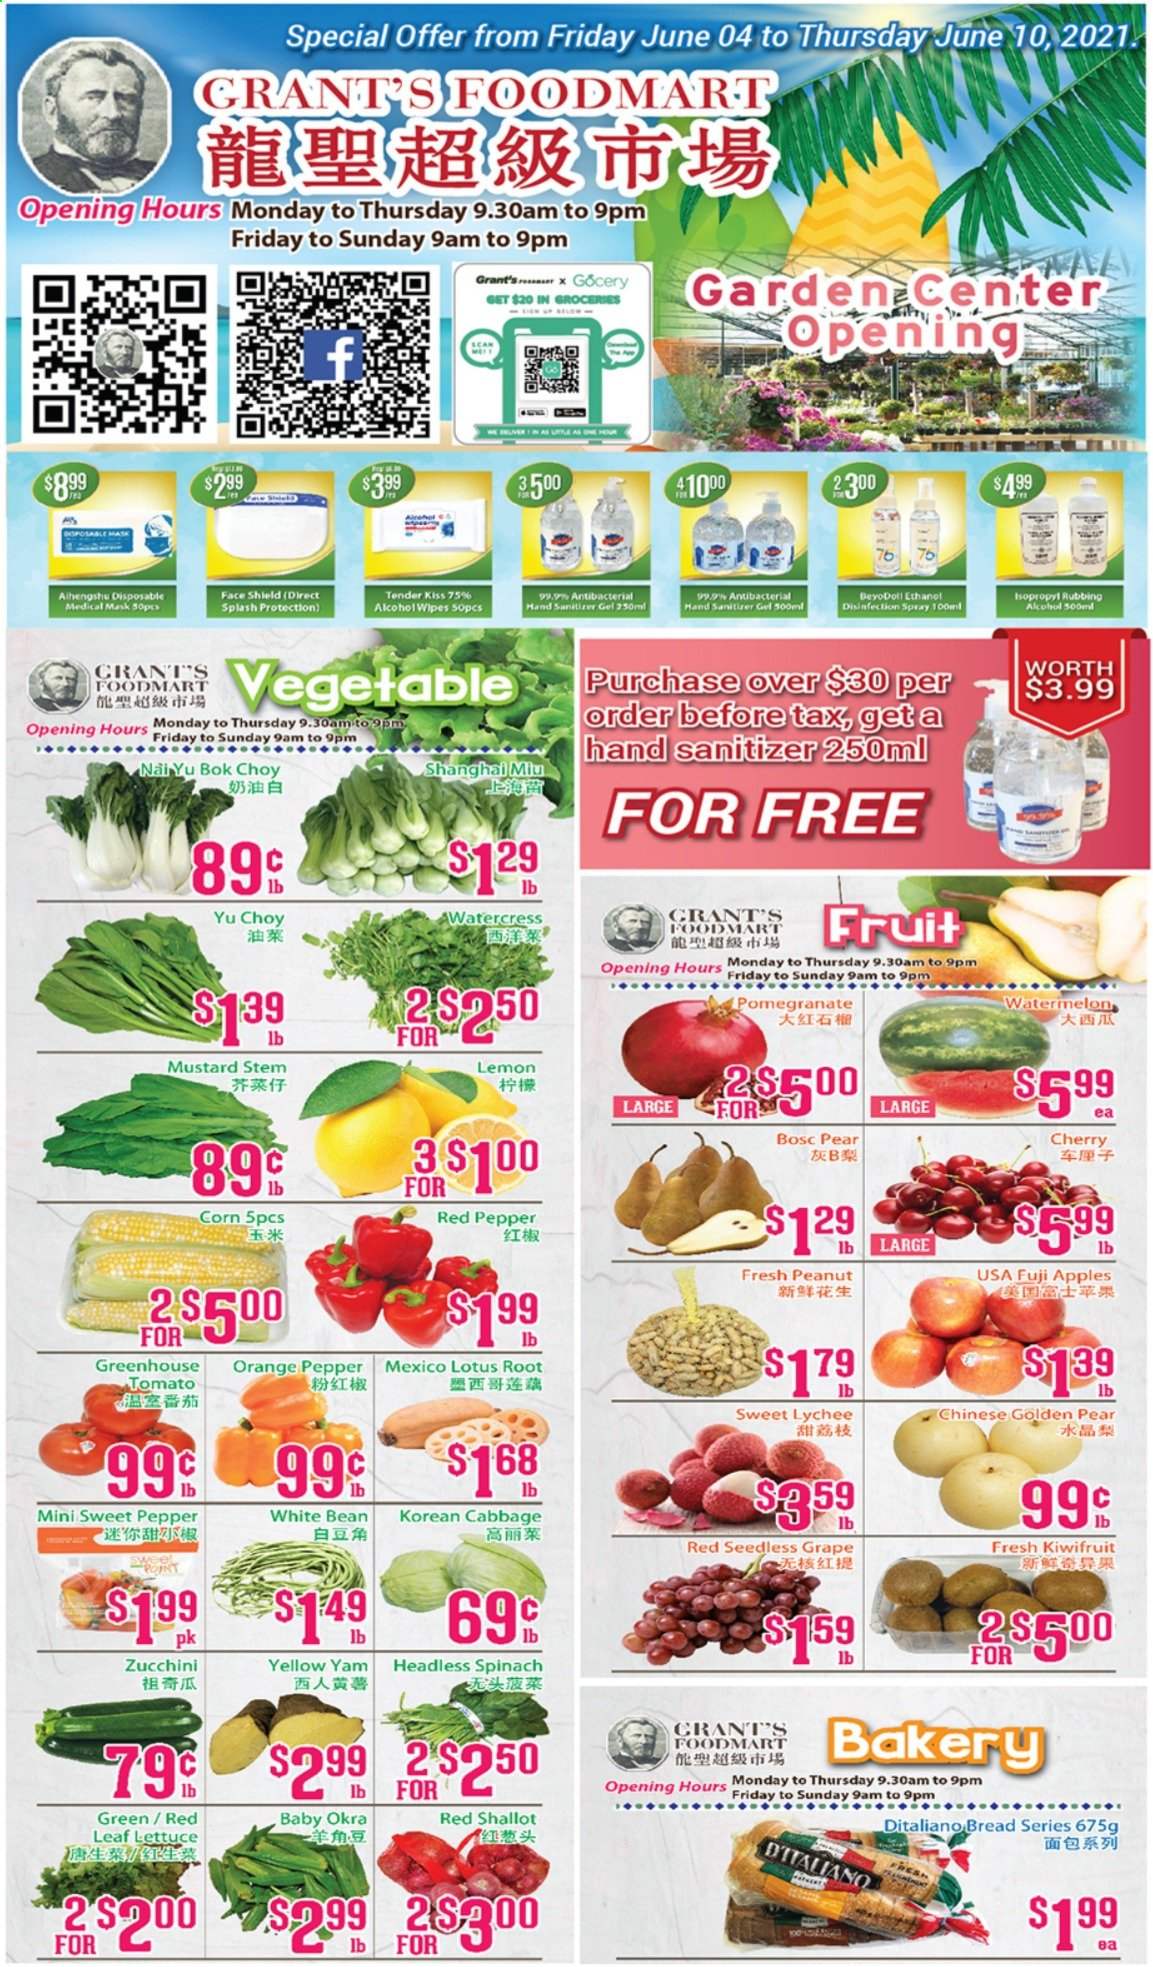 thumbnail - Grant's Foodmart Flyer - June 04, 2021 - June 10, 2021 - Sales products - bread, bok choy, cabbage, corn, spinach, zucchini, okra, apples, lychee, watermelon, cherries, pears, Fuji apple, pomegranate, mustard, Grant's, Lotus, hand sanitizer, kiwi. Page 1.